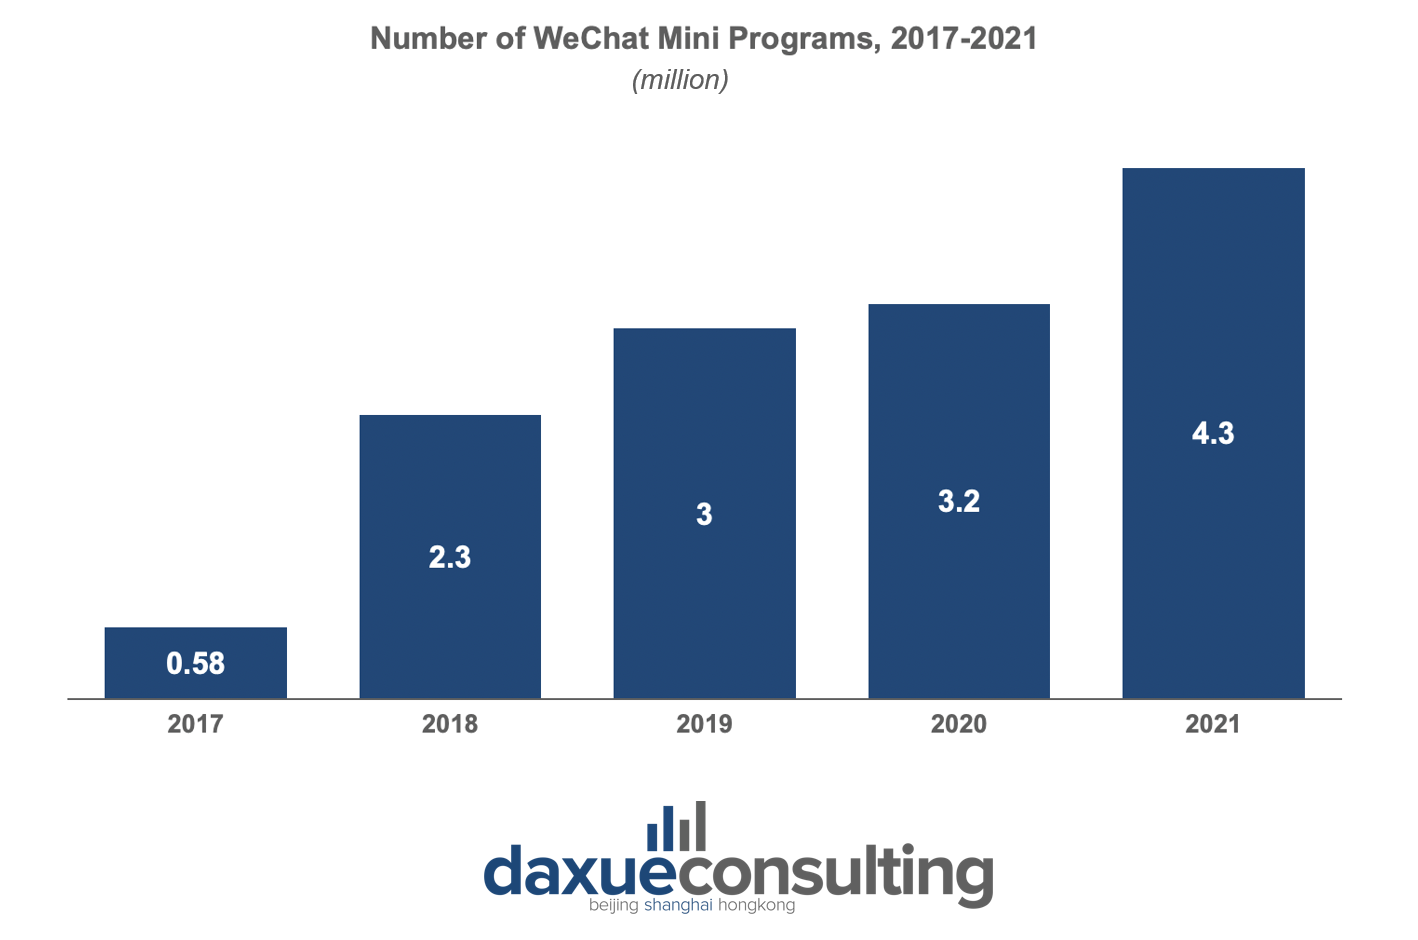 wechat marketing: number of Mini programs 2017-2021